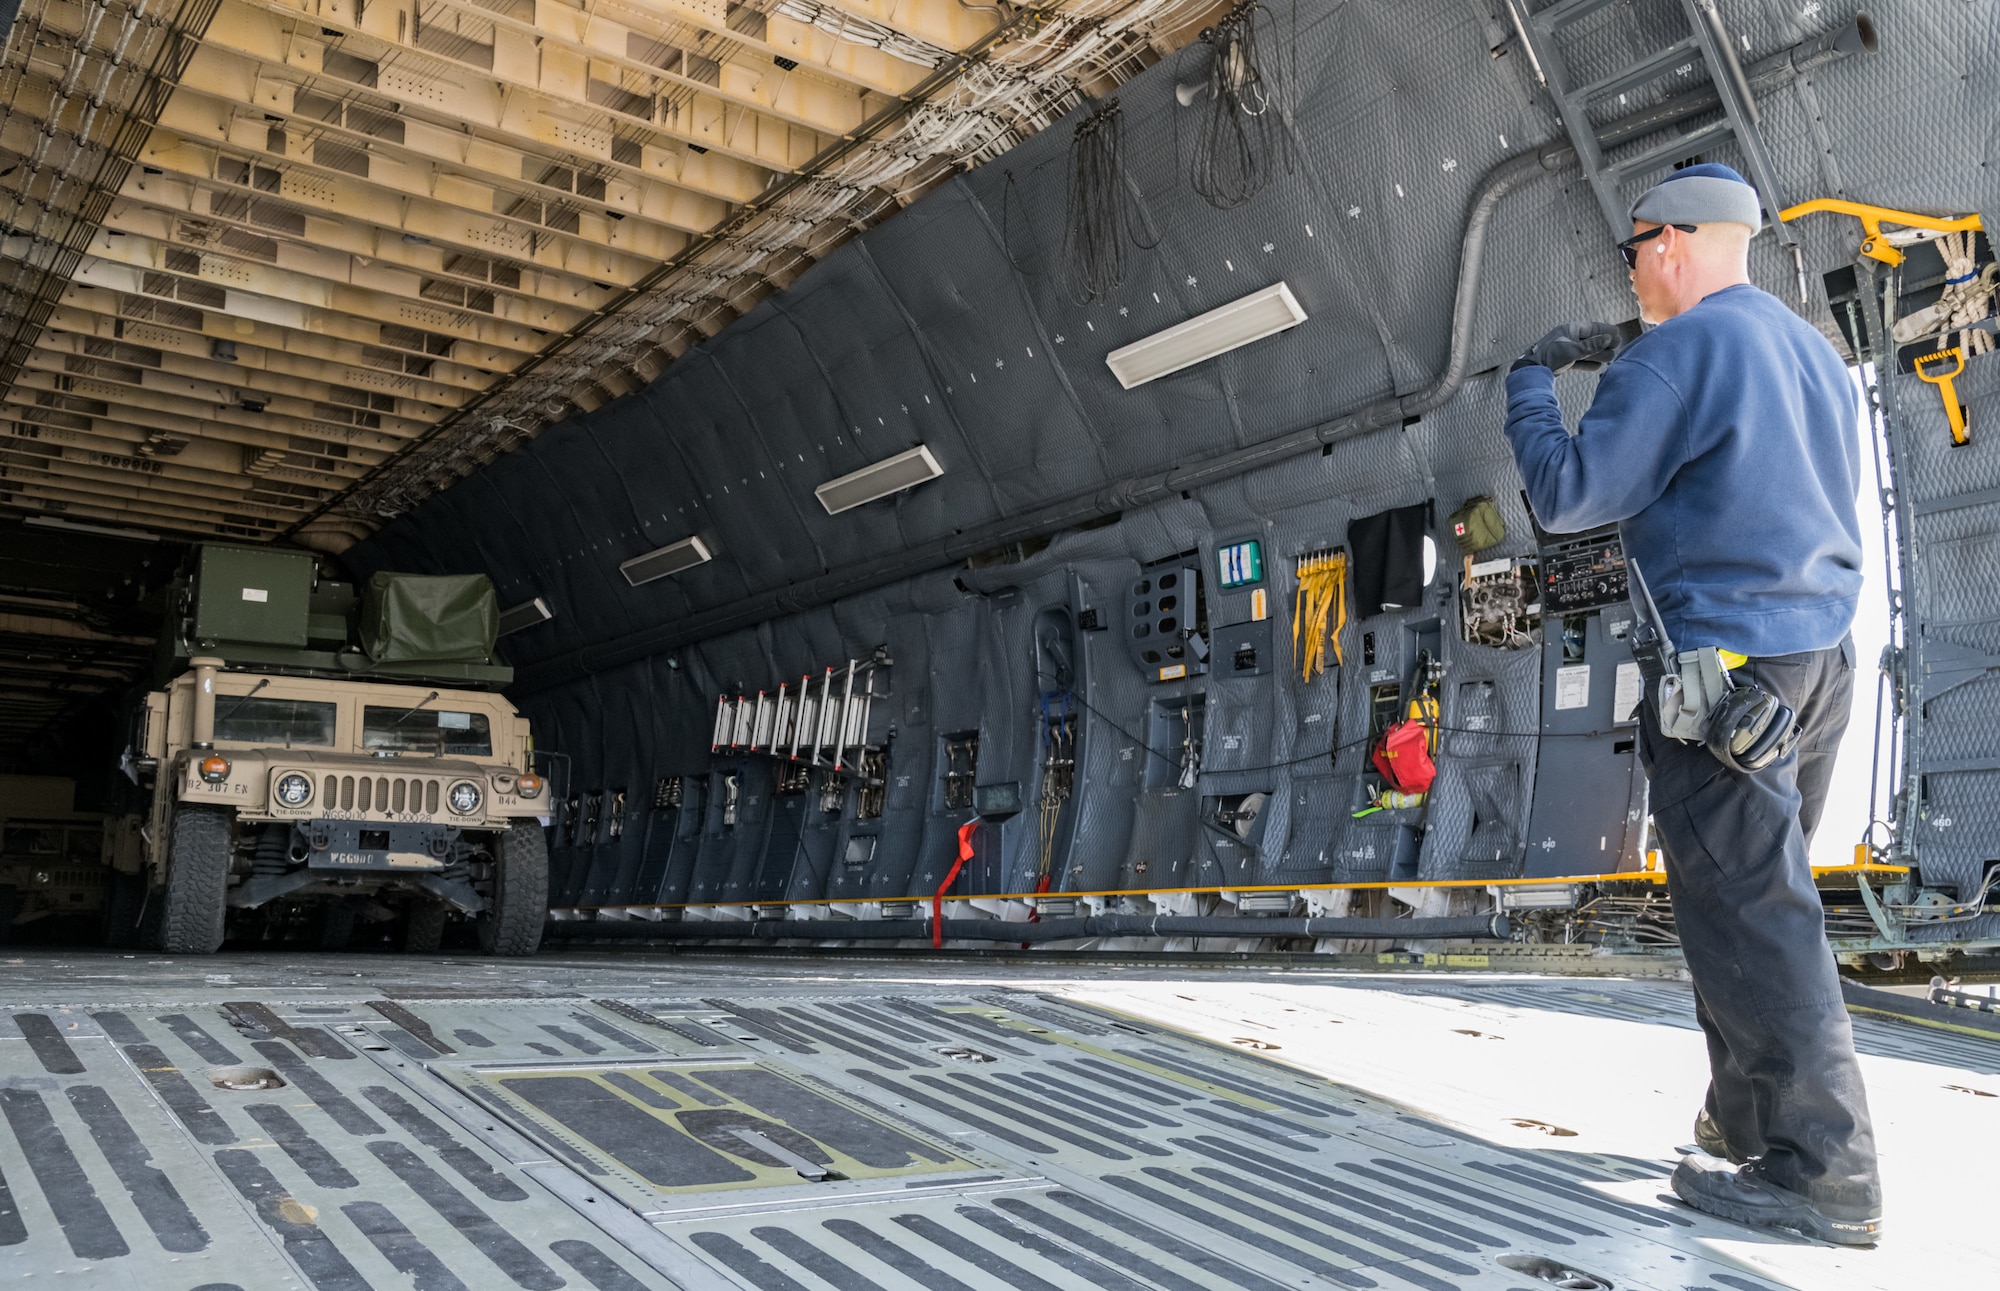 Dane Coward, 436th Aerial Port Squadron ramp supervisor, marshals a humvee in the cargo compartment of a C-5M Super Galaxy, March 26, 2020, at Dover Air Force Base, Delaware. Coward and his crew unloaded numerous humvees off the Super Galaxy as required airlift operations continued during the evolving COVID-19 pandemic. (U.S. Air Force photo by Roland Balik)